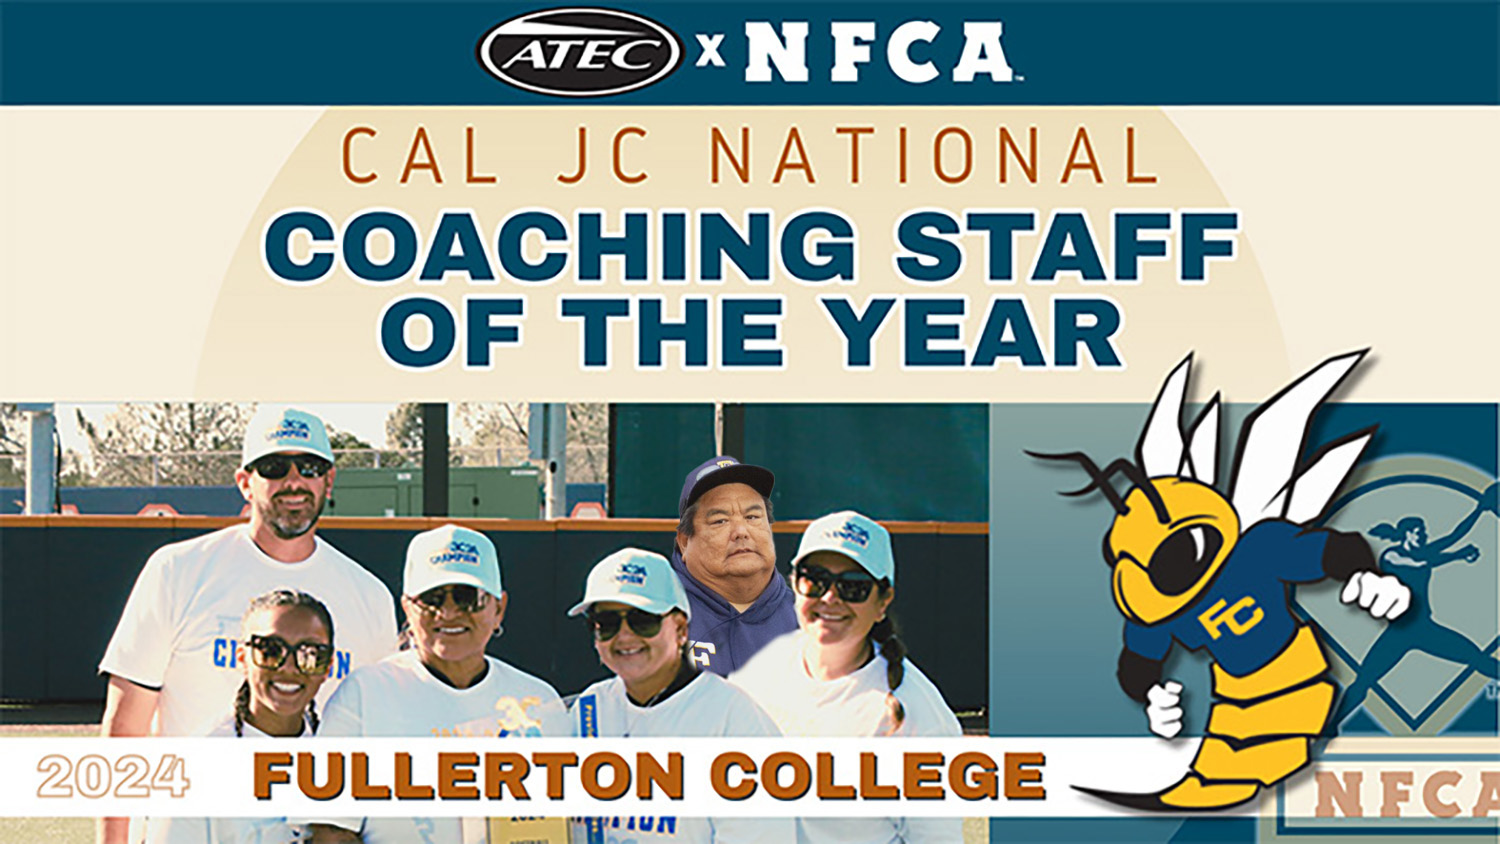 Fullerton named 2024 ATEC/NFCA Cal JC National Coaching Staff of the Year